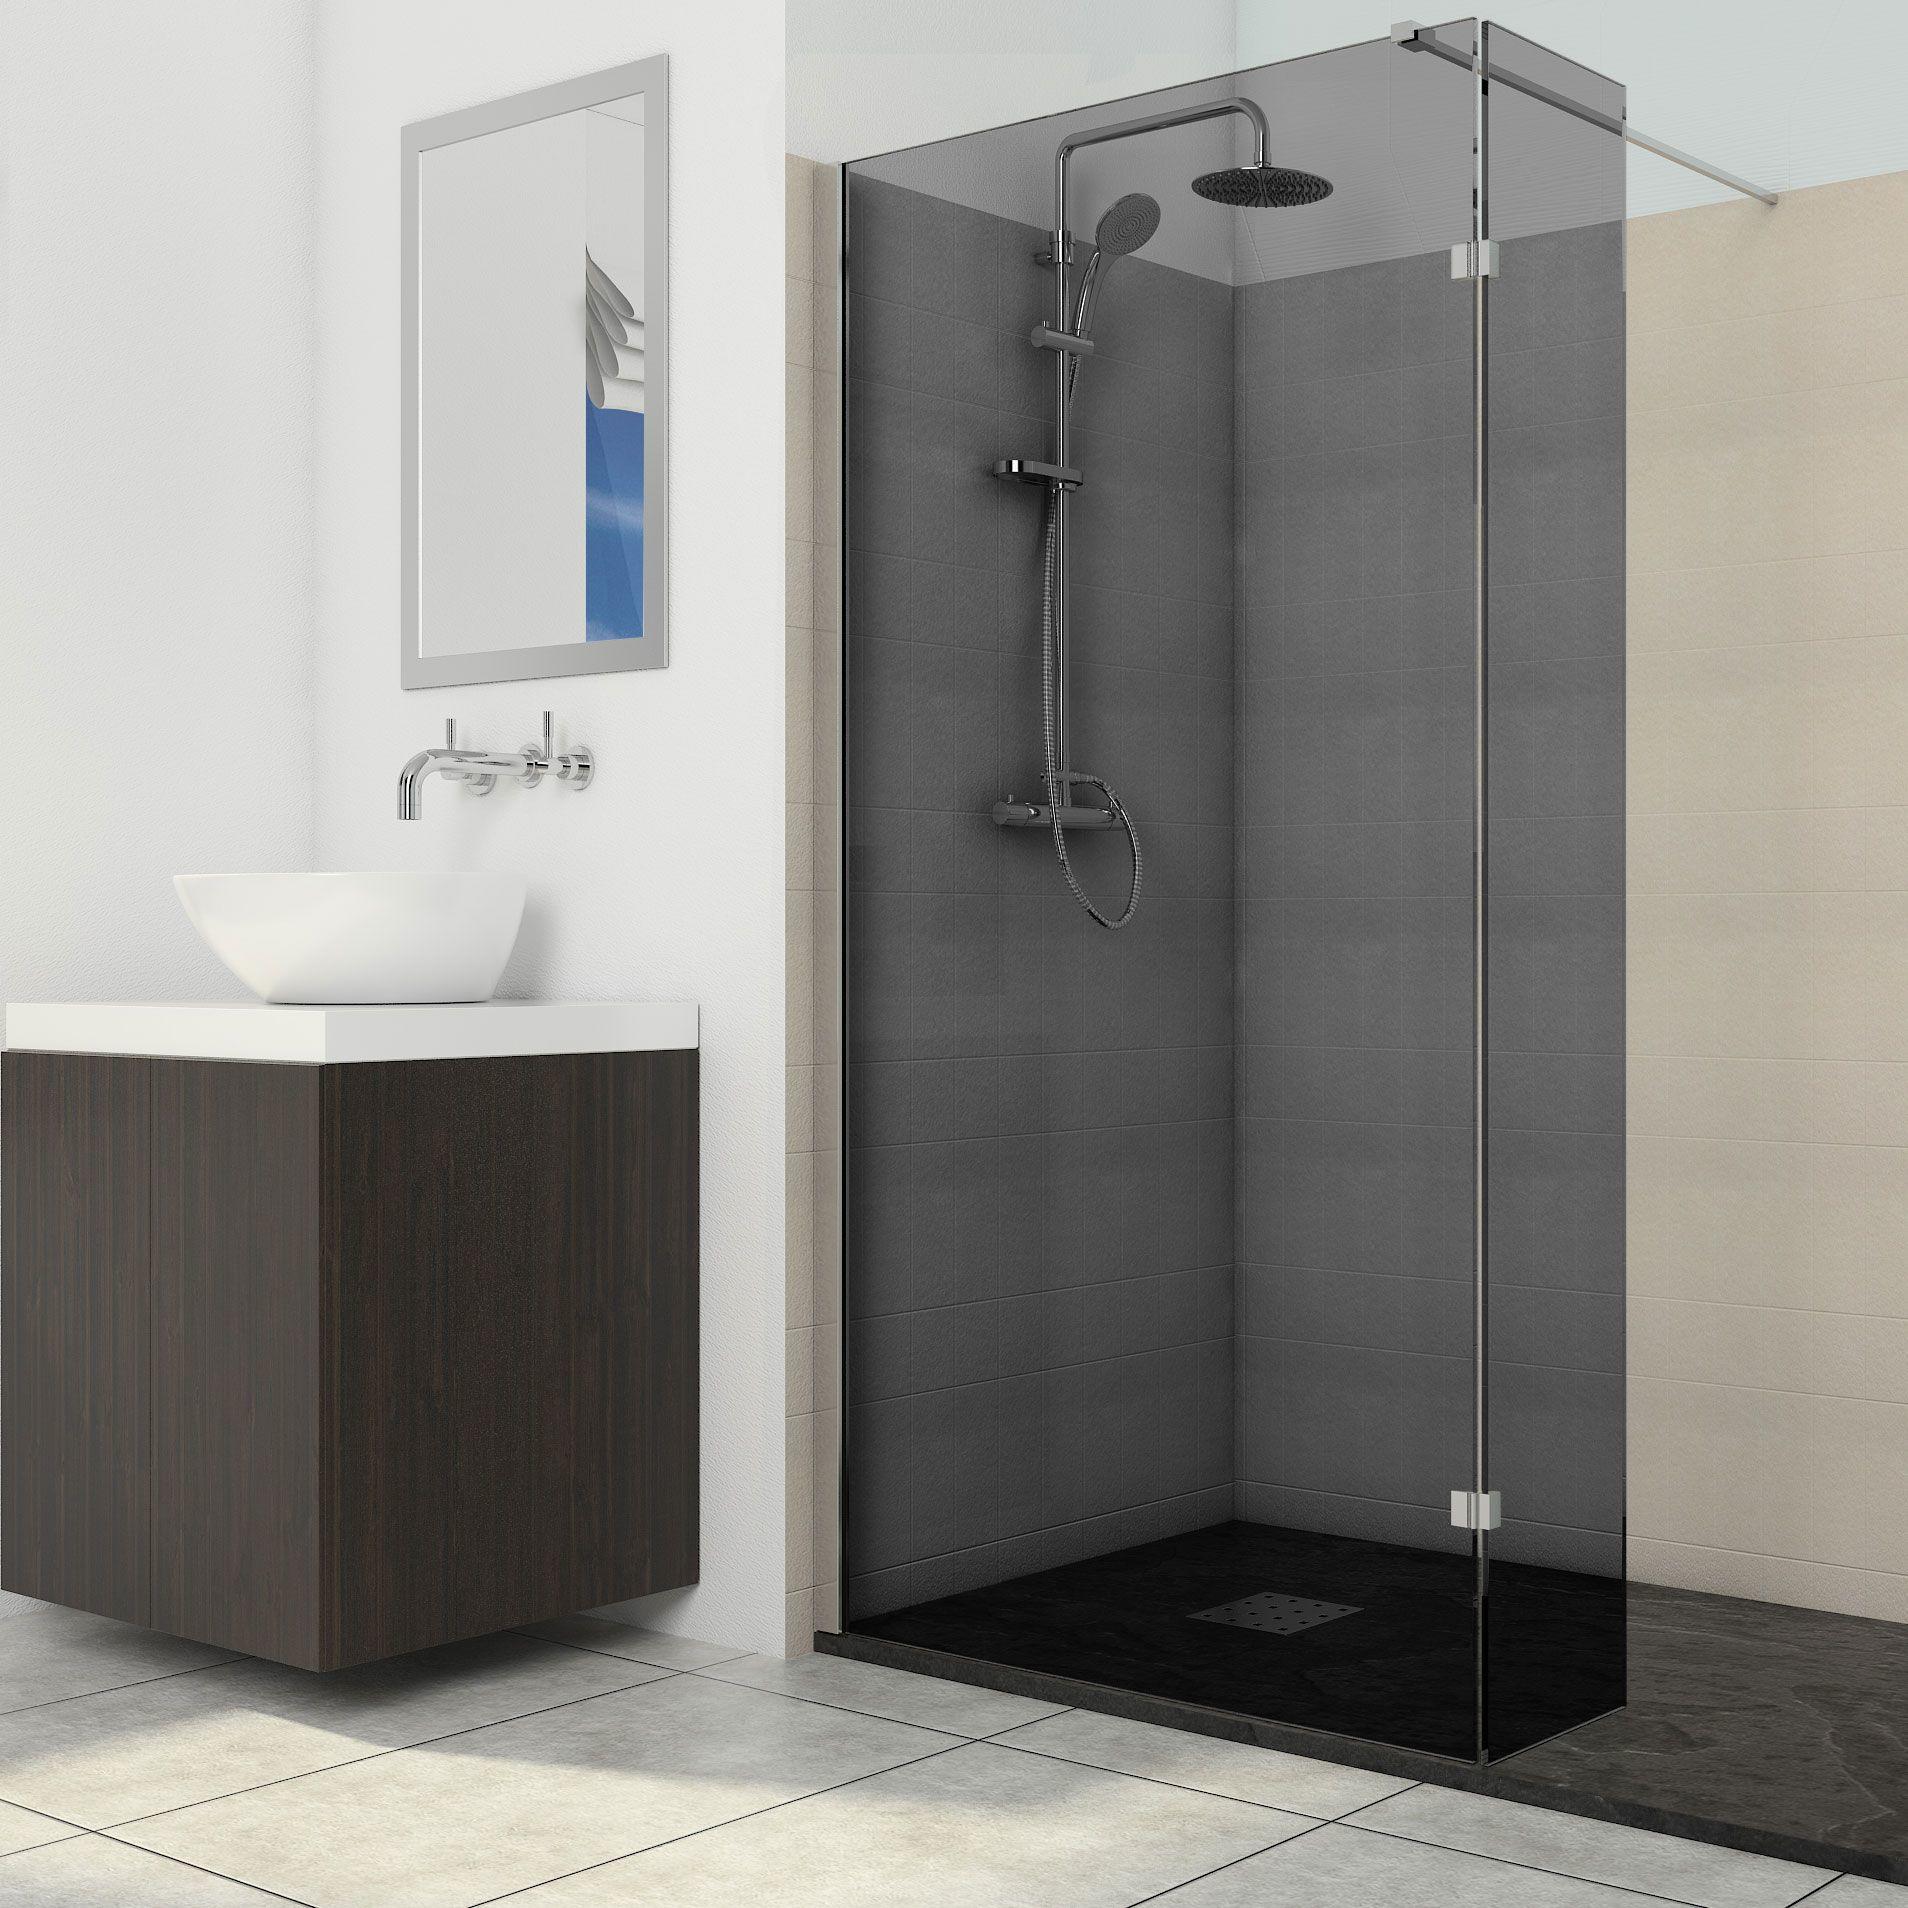 Lisna Waters Valencia 300mm Return Black 8mm Glass Wet Room Shower Screen Hinged Panel